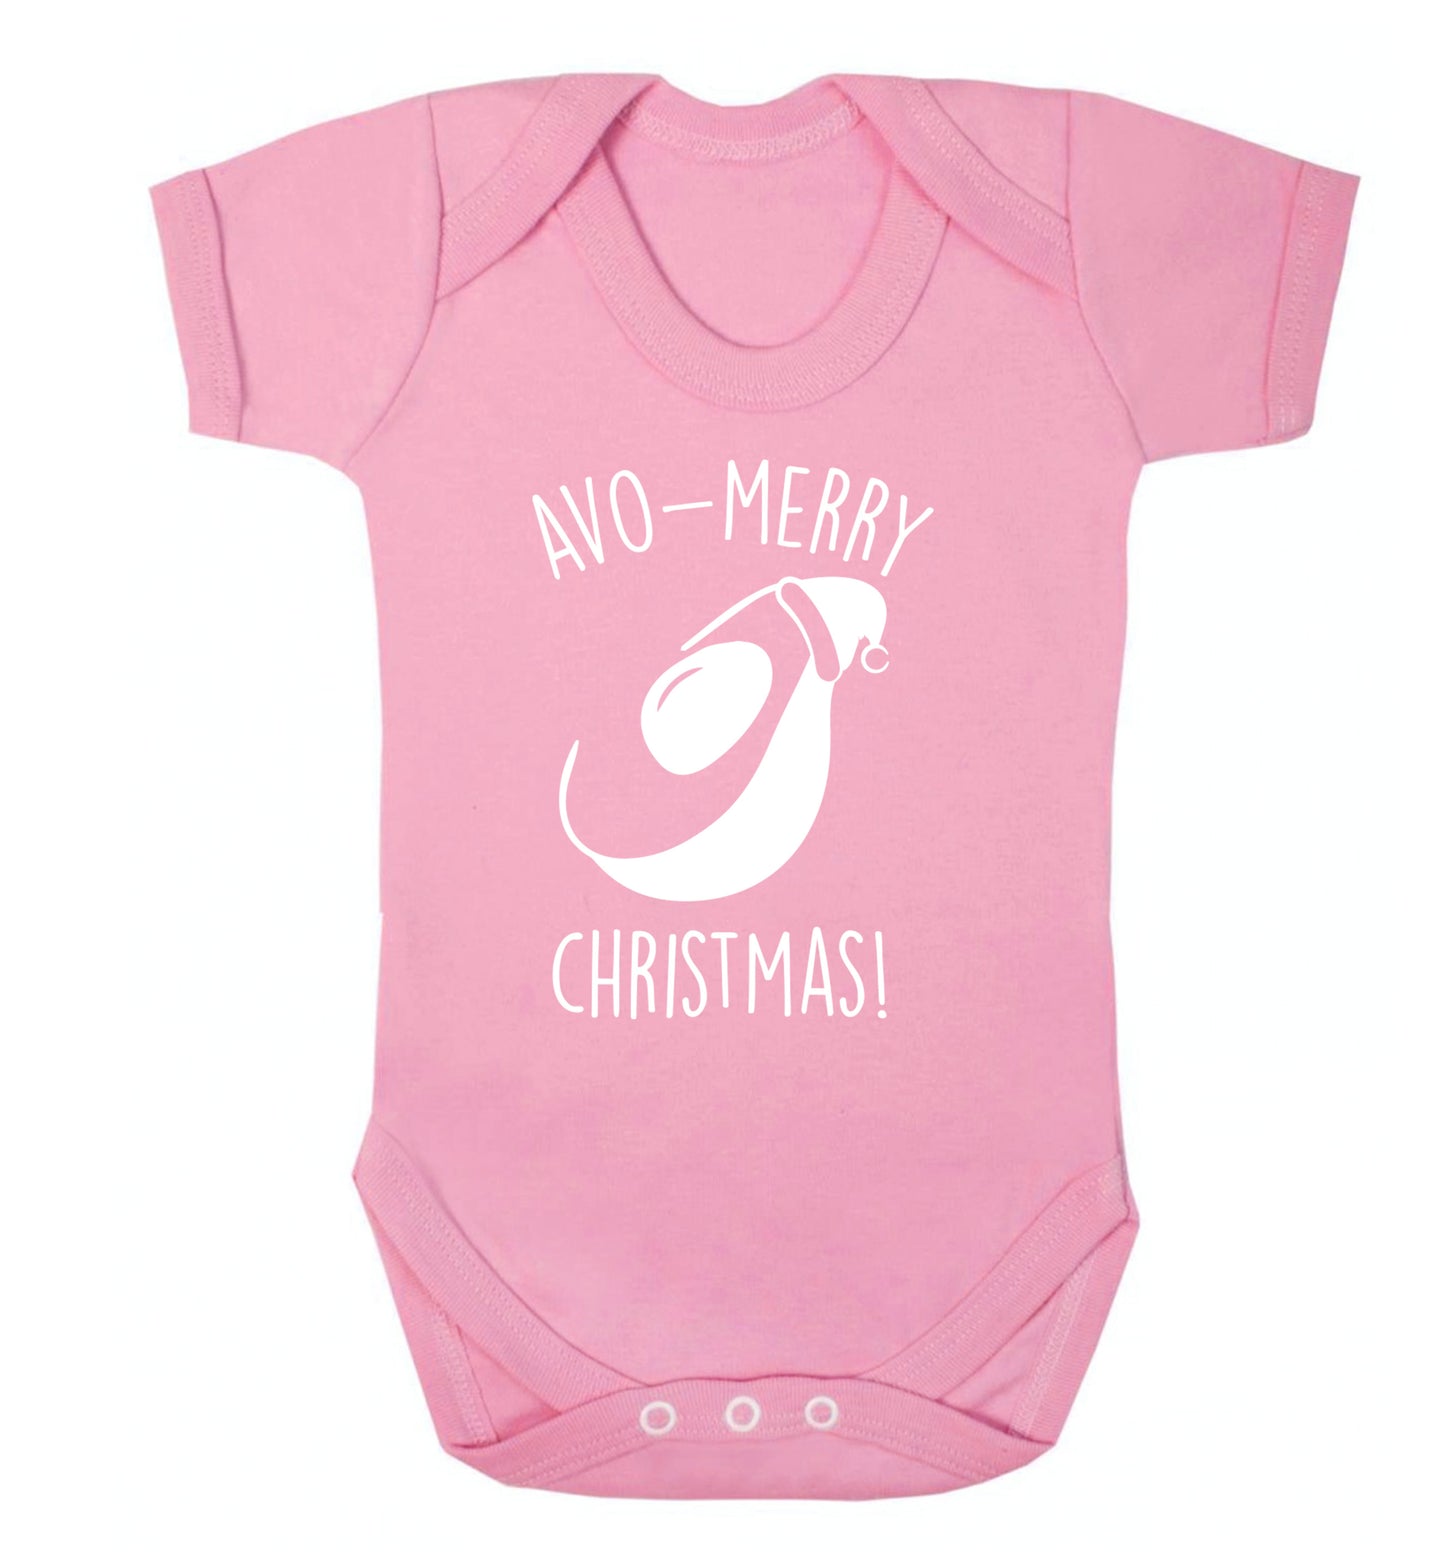 Avo-Merry Christmas Baby Vest pale pink 18-24 months